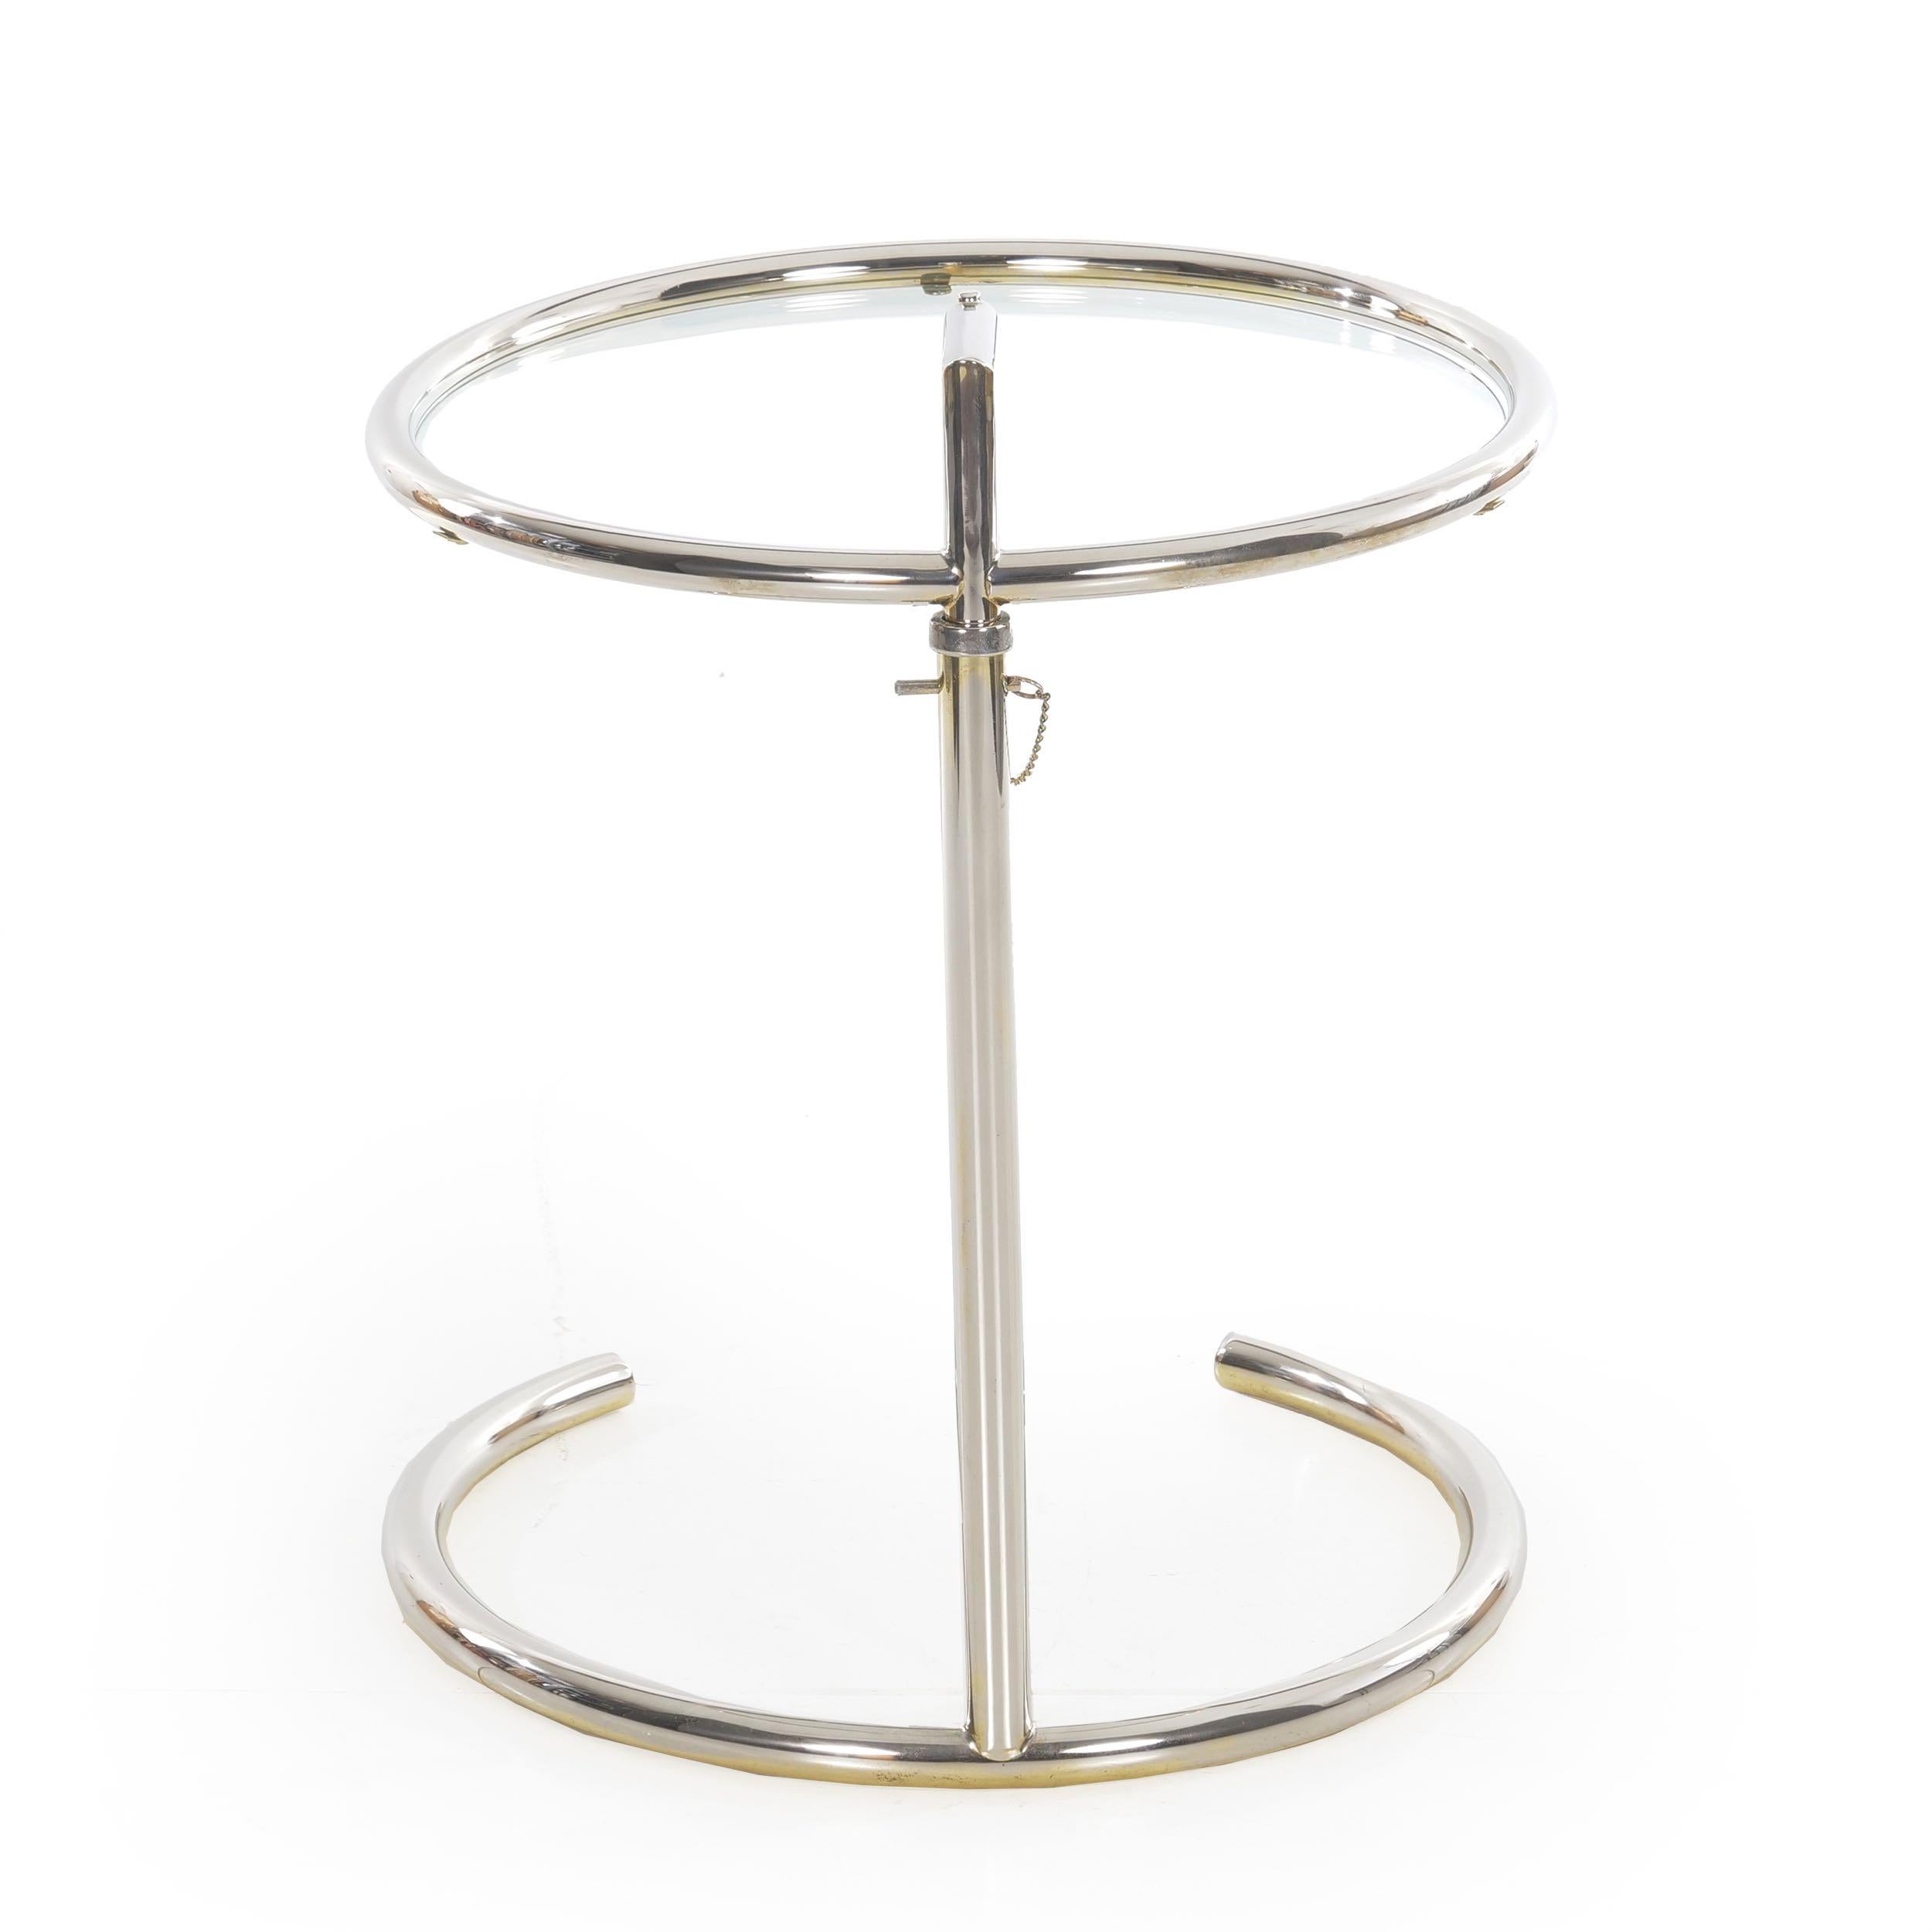 20th Century Art Deco “E 1027” Chrome and Glass Side Table by Eileen Gray, circa 1970s